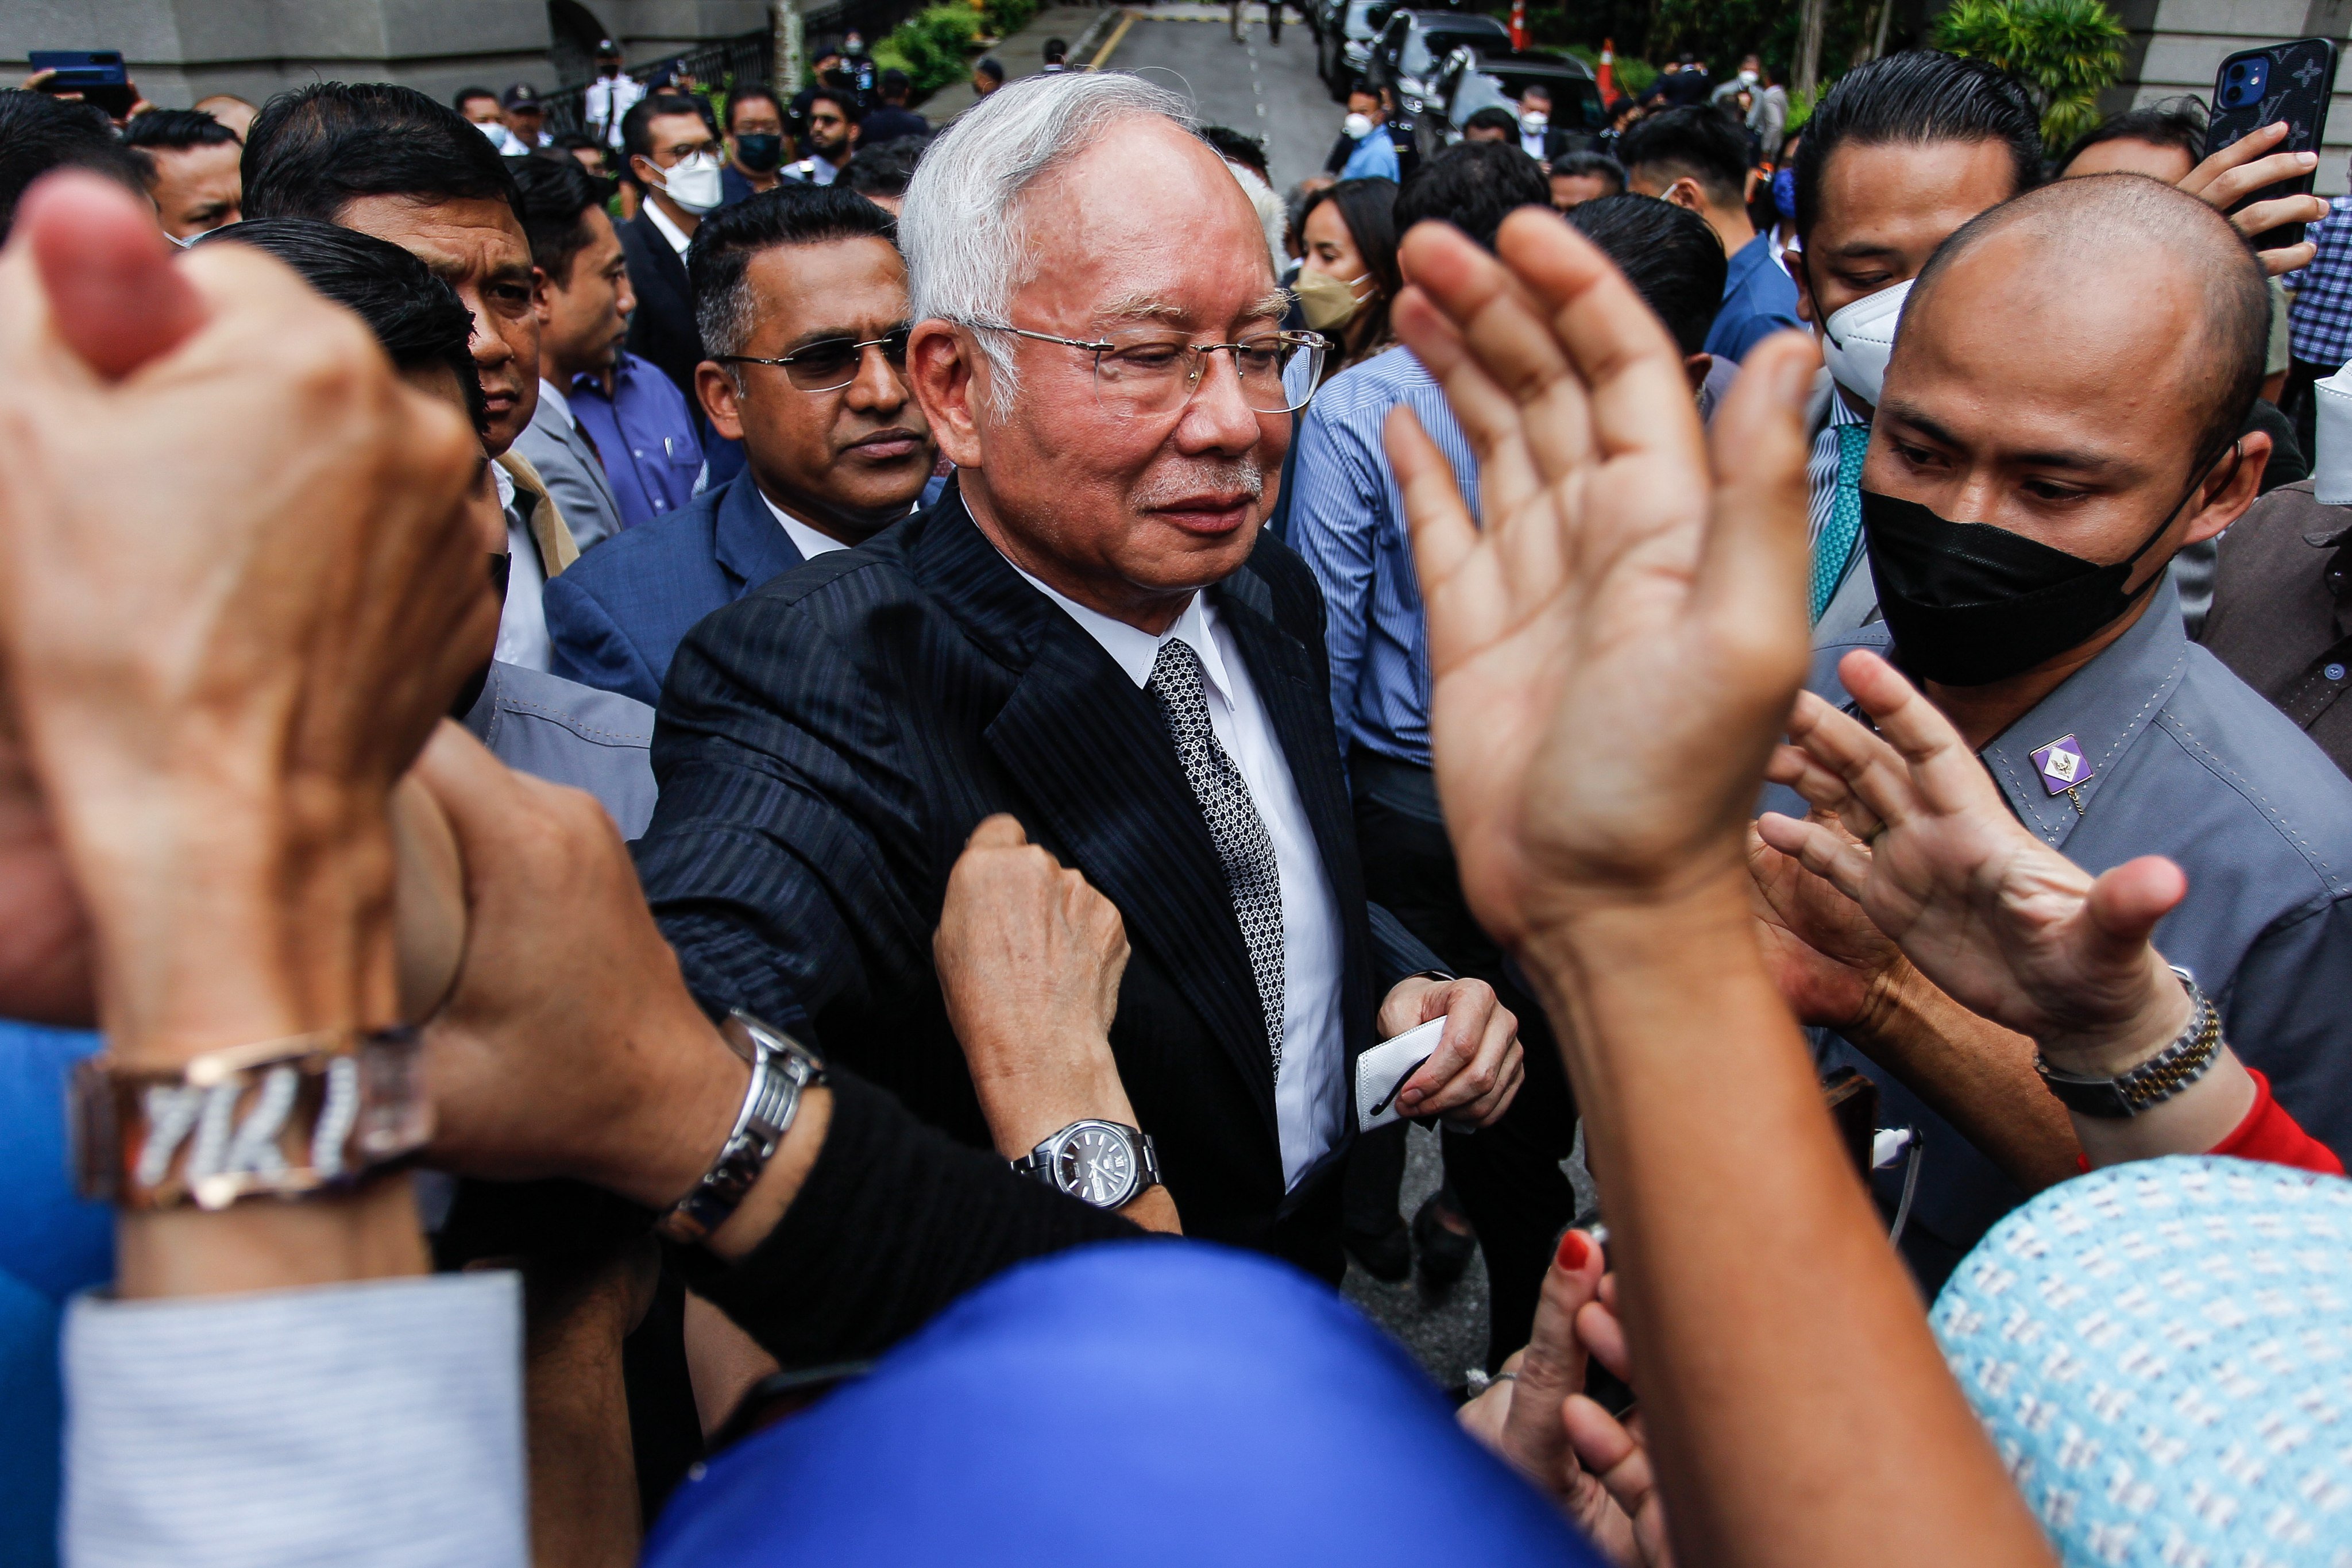 An investigation into the high-profile Malaysian judge who presided over the 2020 conviction of ex-leader Najib Razak found no evidence of criminal wrongdoing, Prime Minister Anwar Ibrahim said on Monday in the latest blow to efforts to exonerate the jailed politician. Photo: EPA-EFE